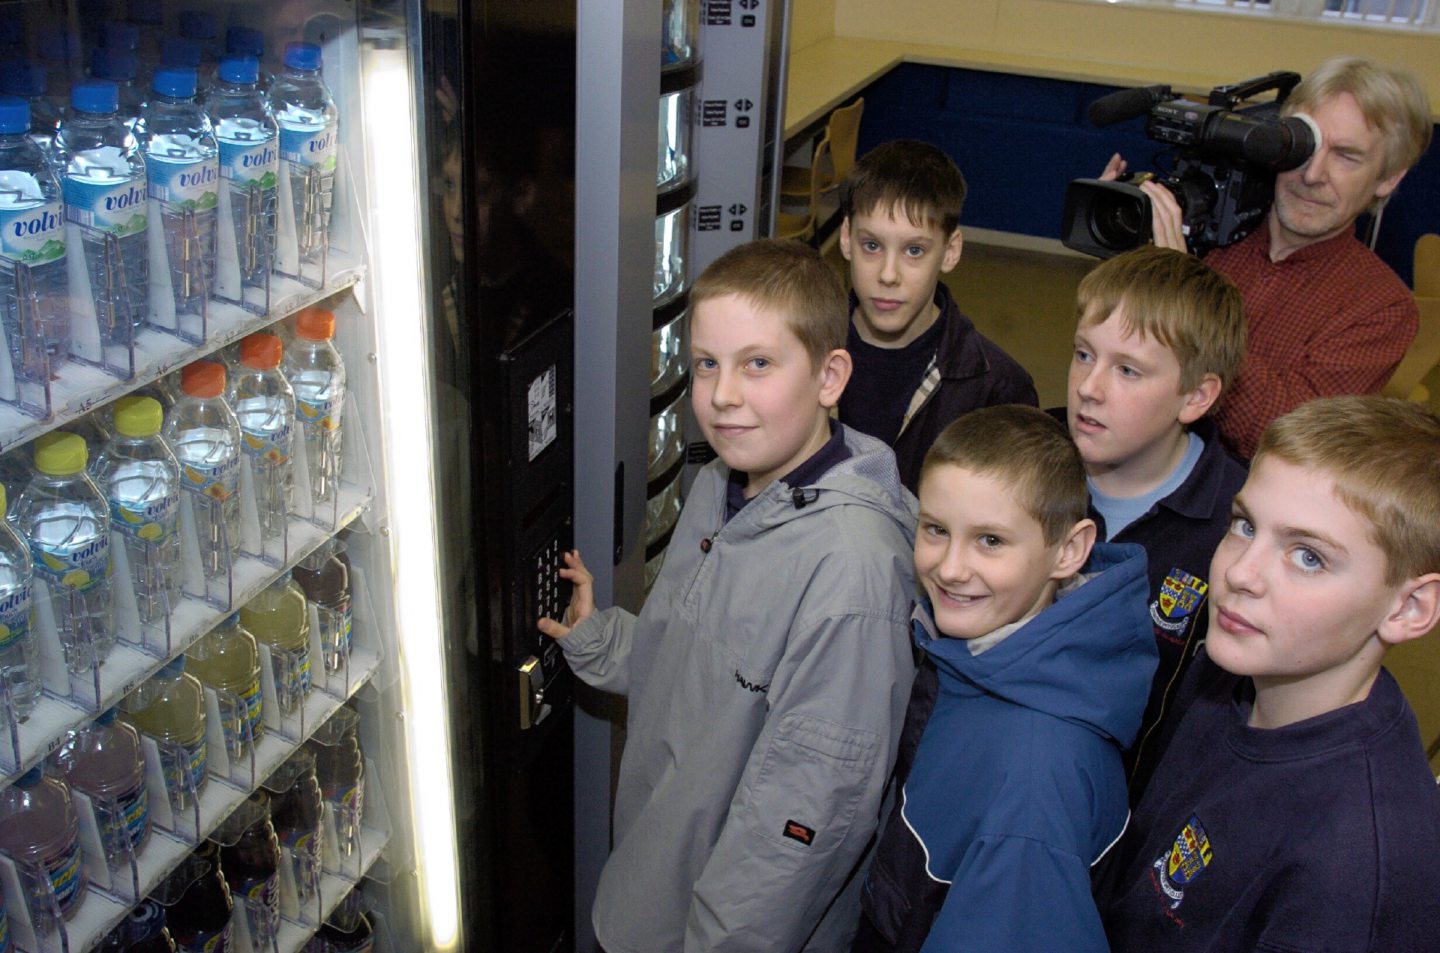 Pupils with a cameraman gathered around a vending machine